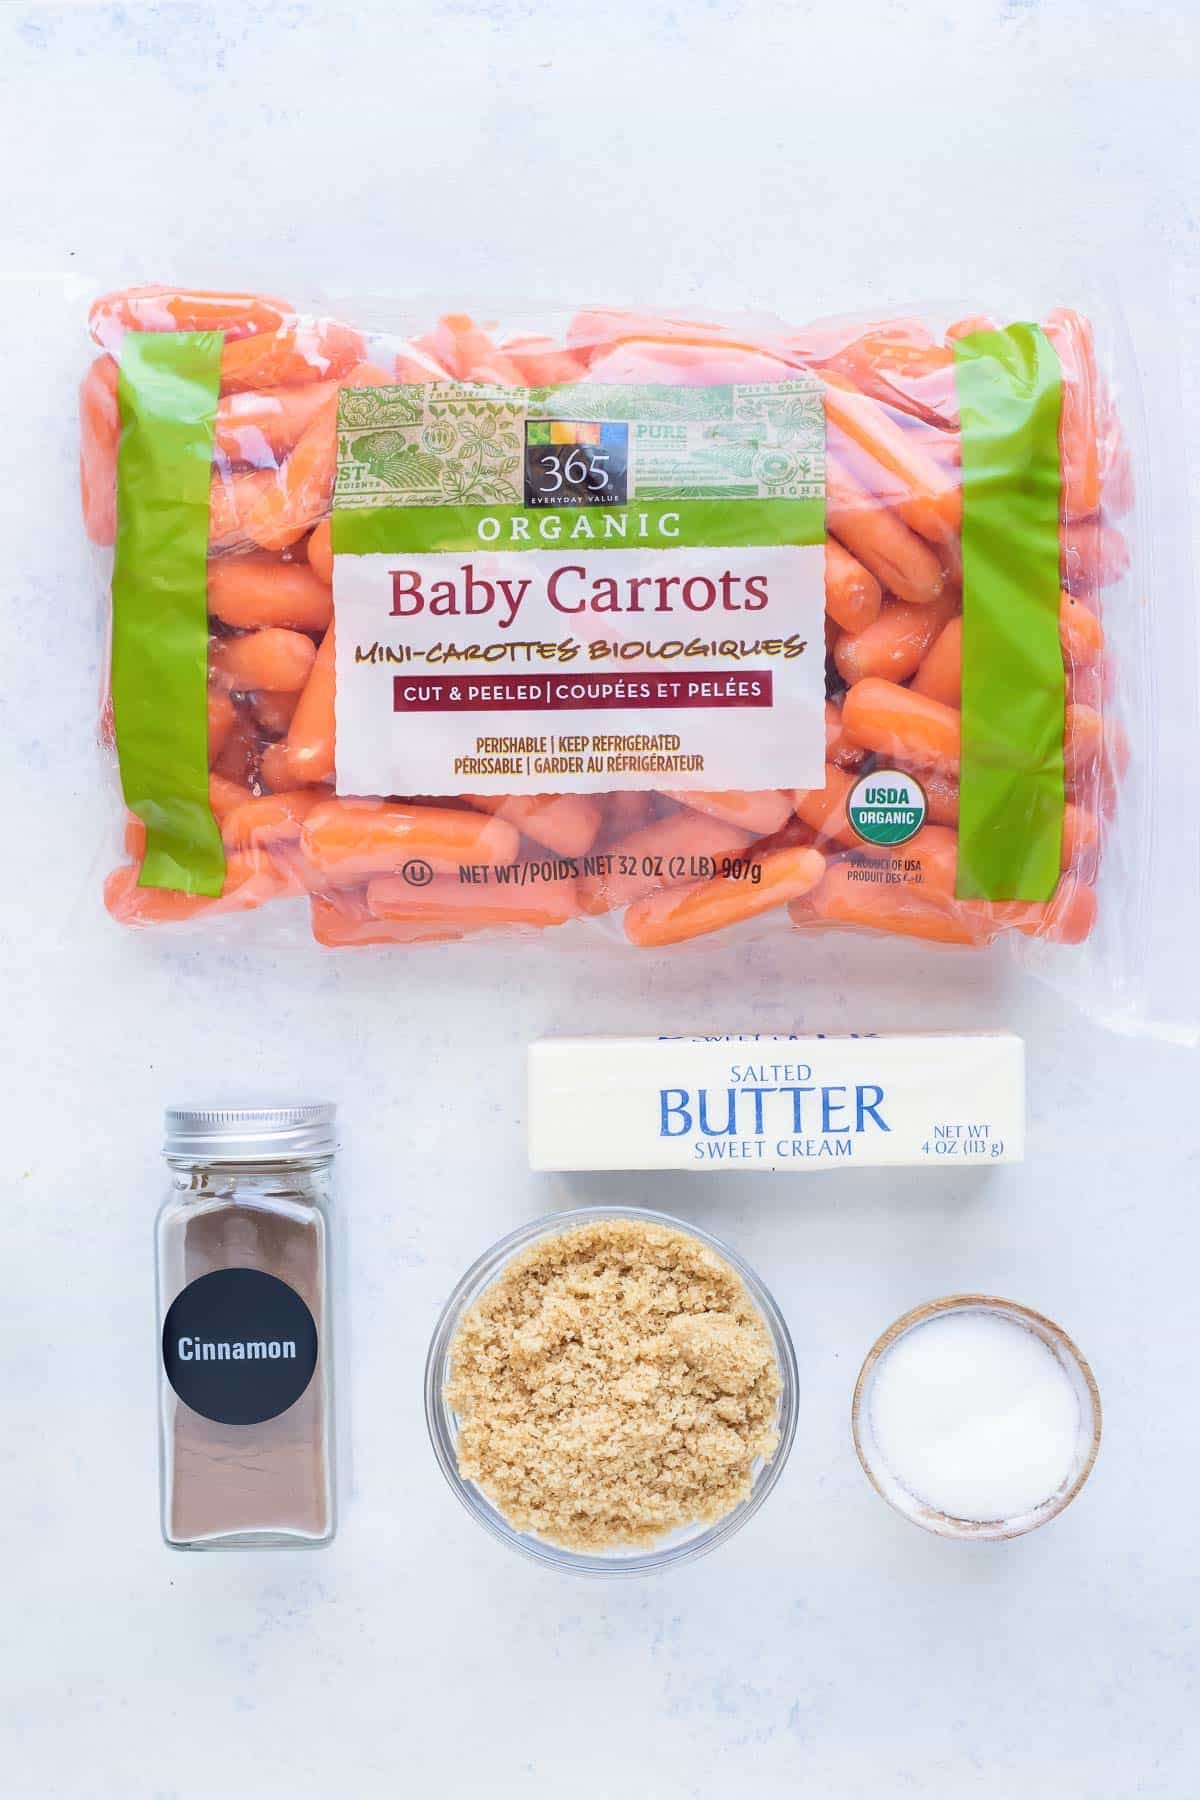 Baby carrots, brown sugar, butter, cinnamon, and salt are the ingredients in this recipe.